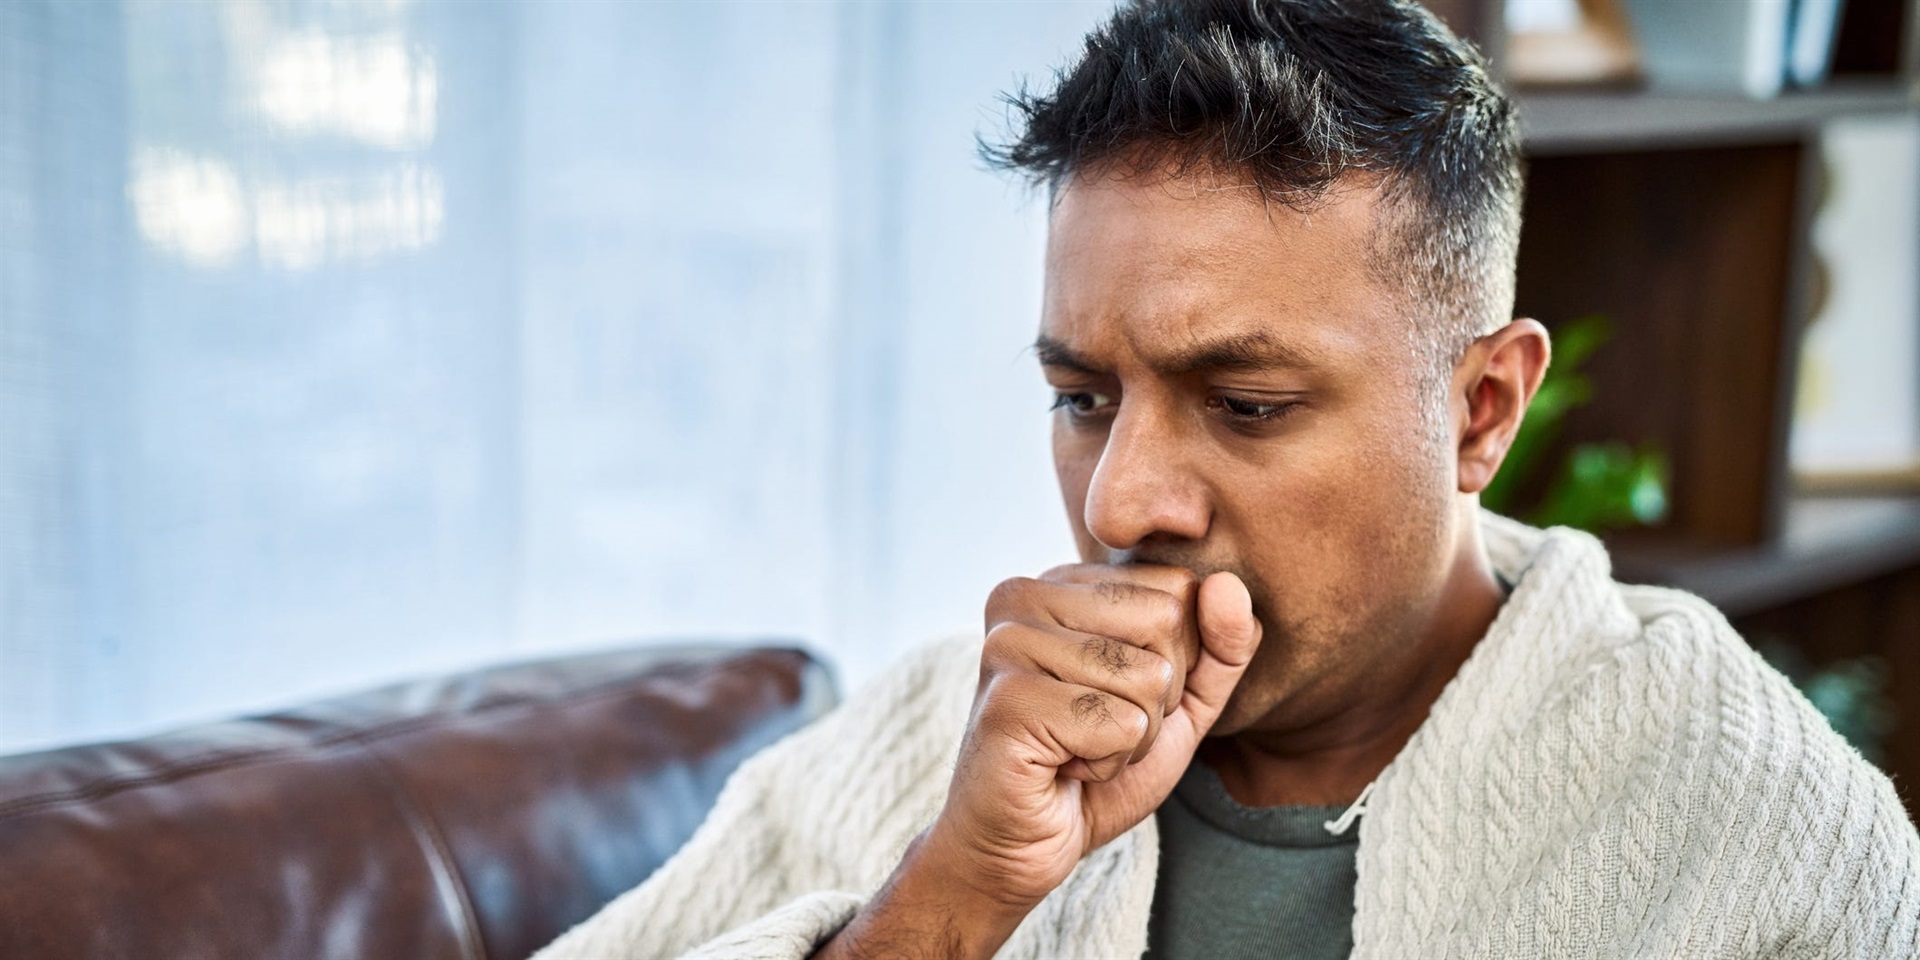 A chronic cough is annoying but it doesn’t have to be. Charday Penn/Getty Images